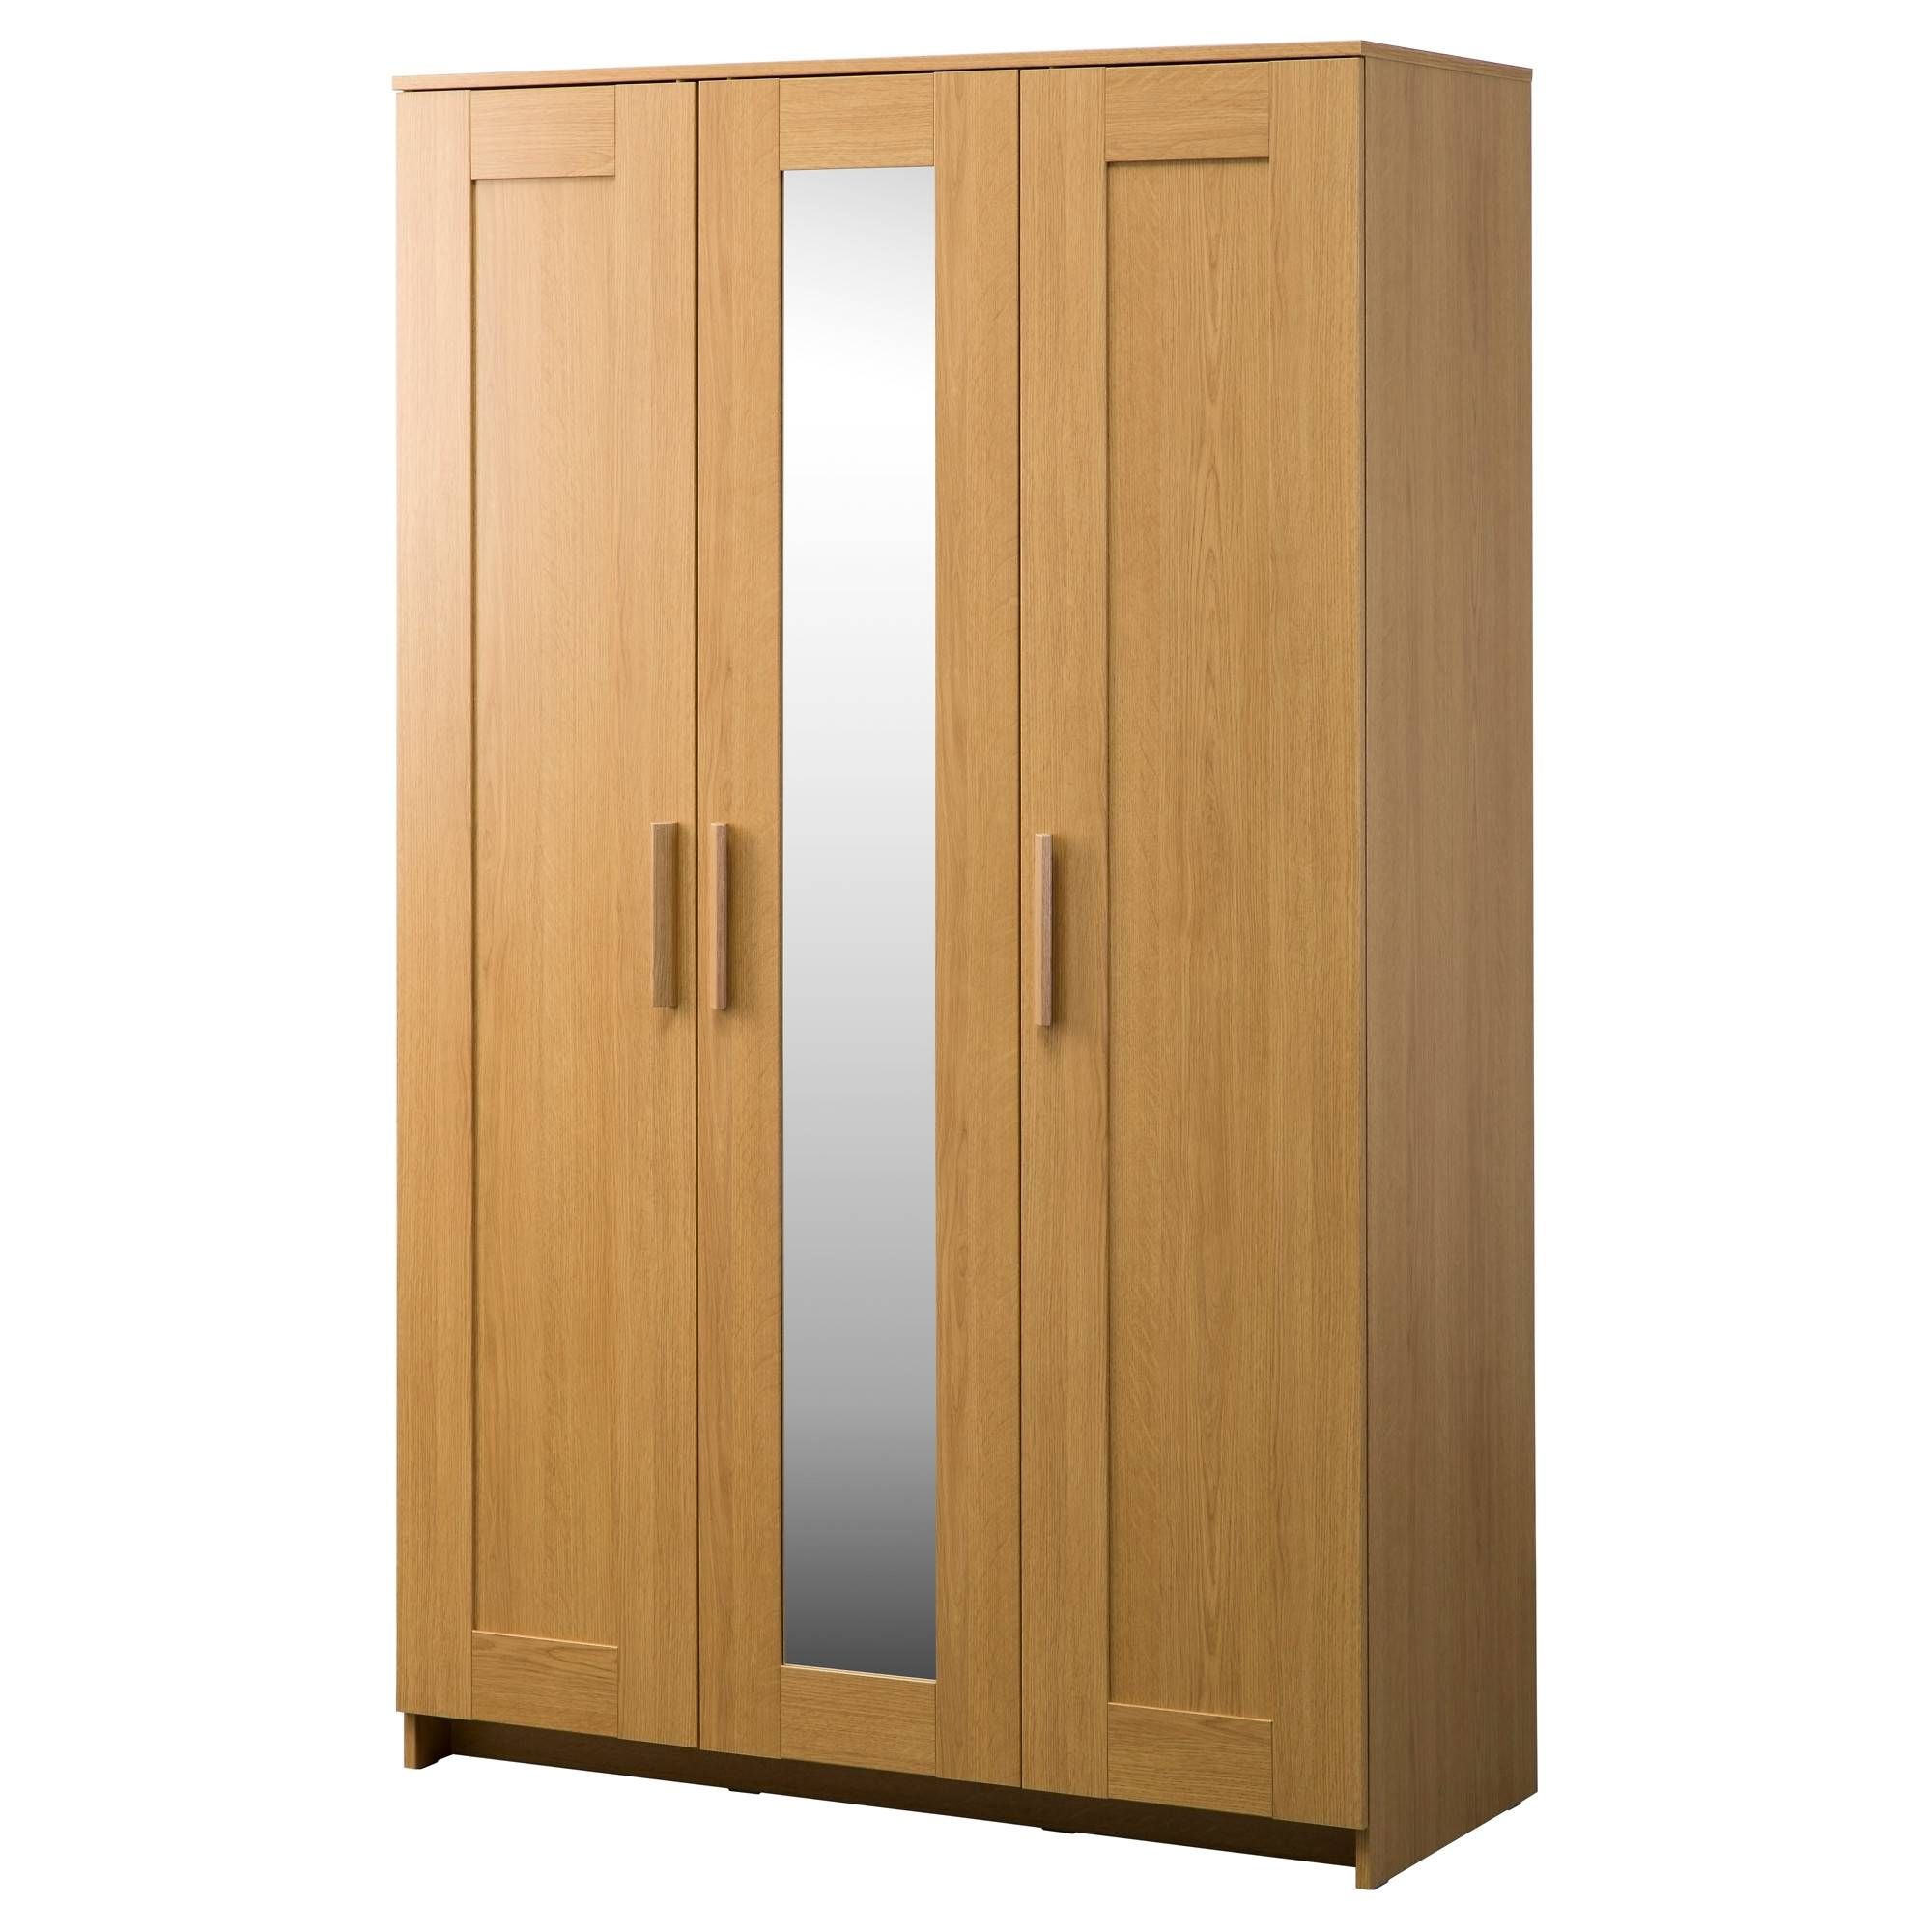 Wardrobes | Ikea With Wooden Wardrobes (View 11 of 15)